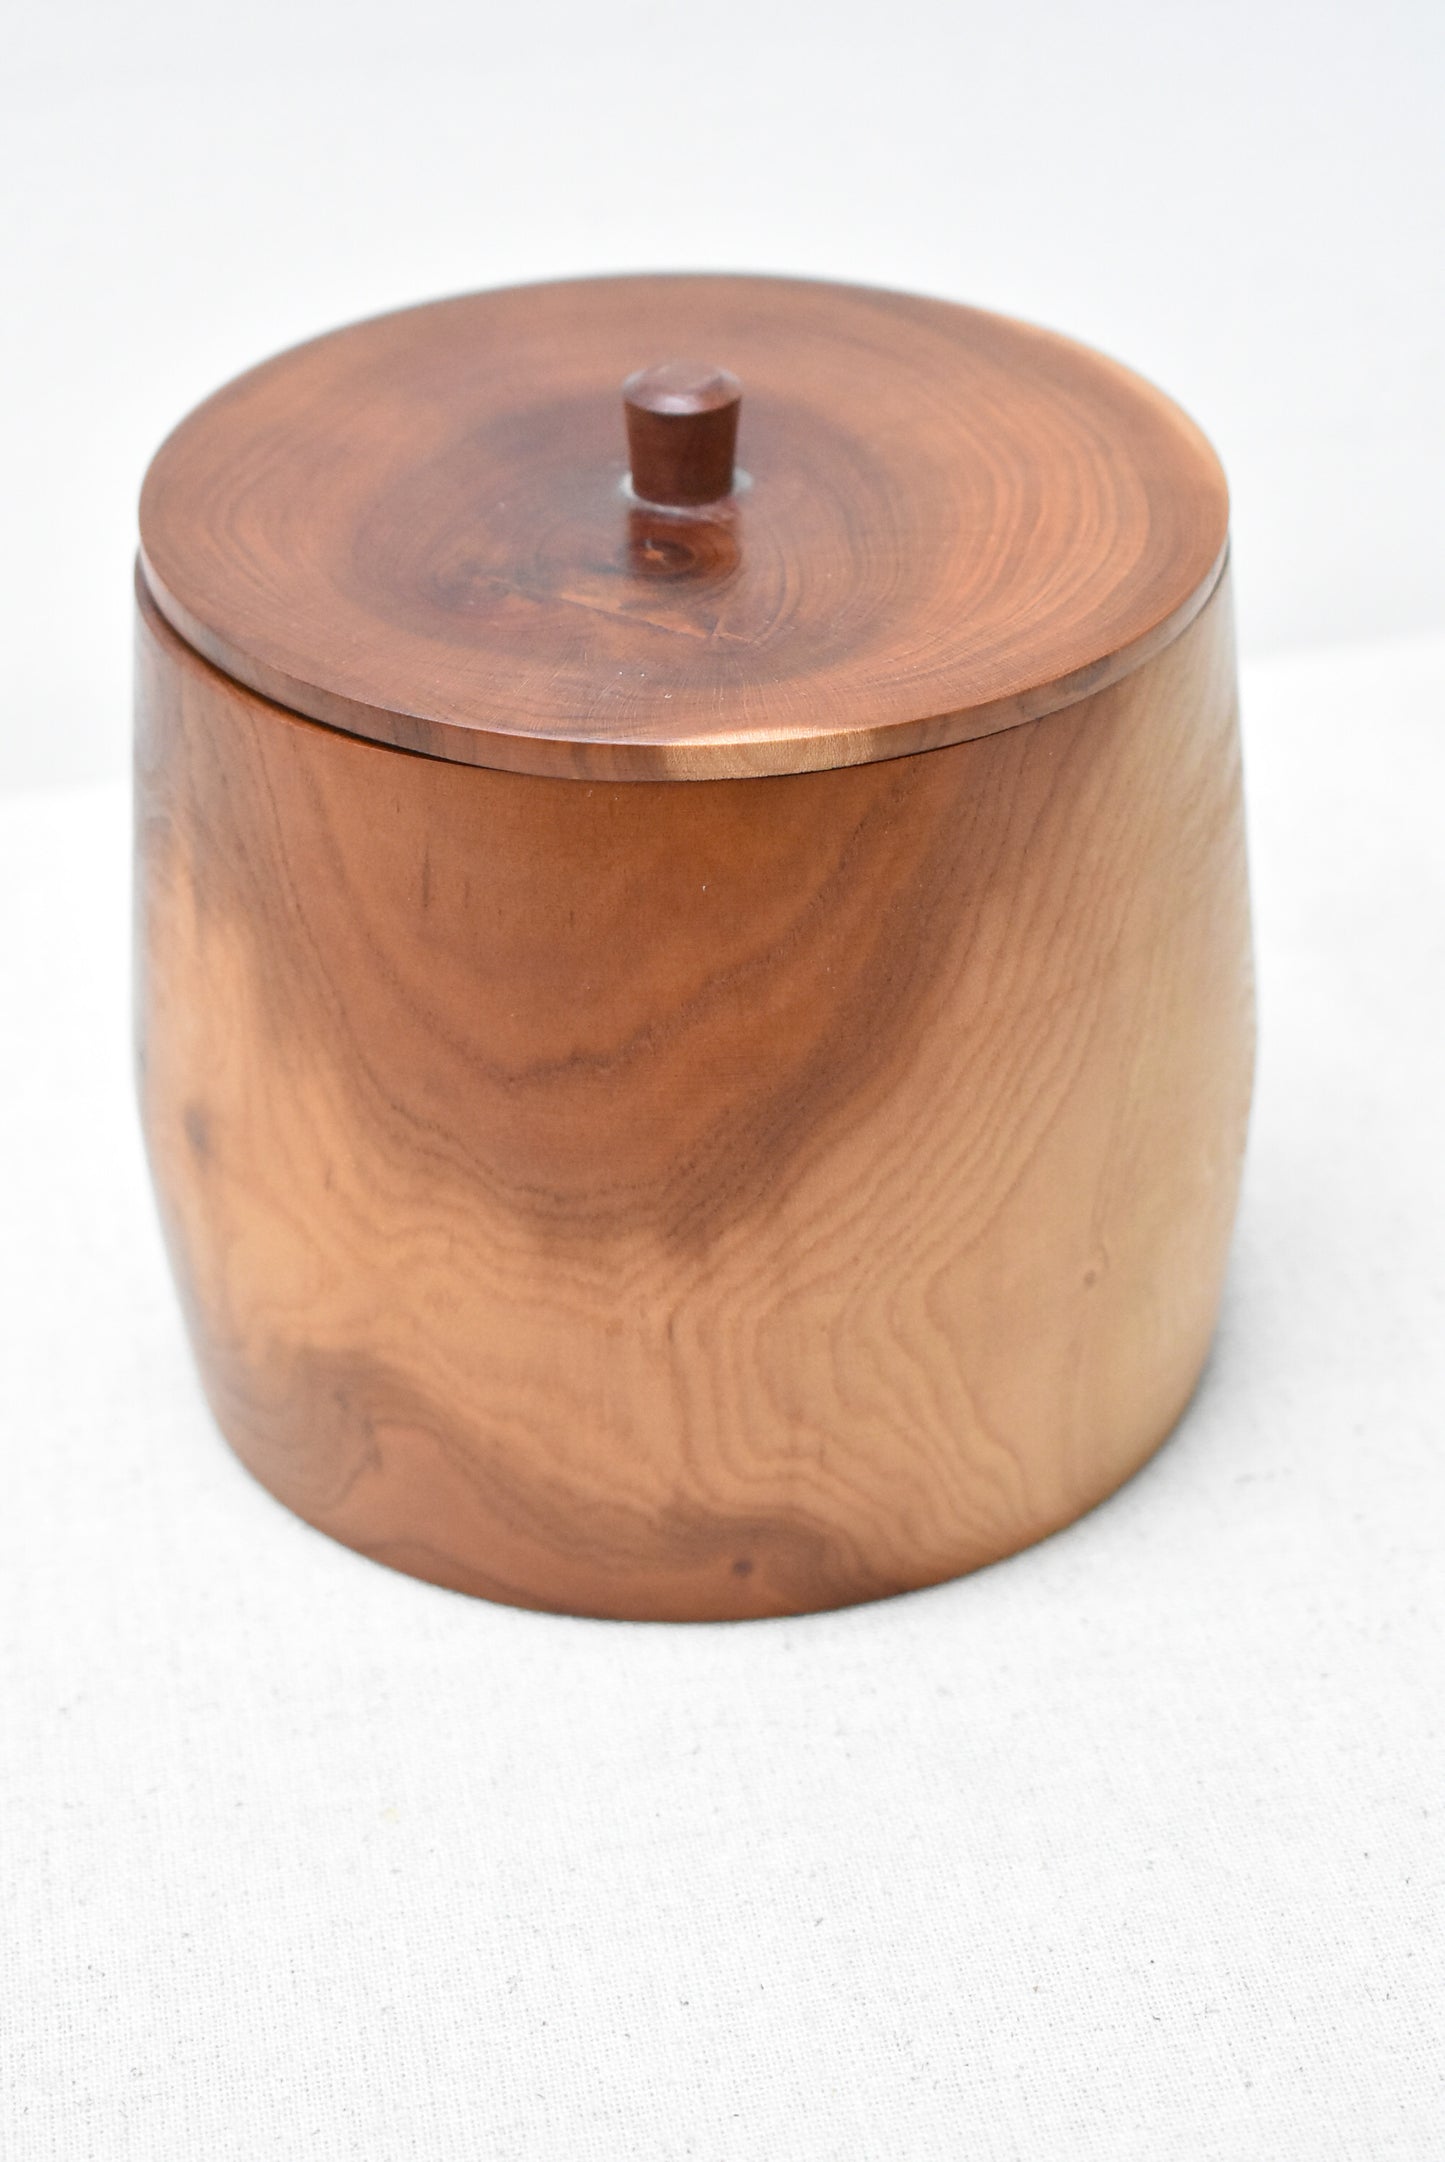 Turned wood container with lid